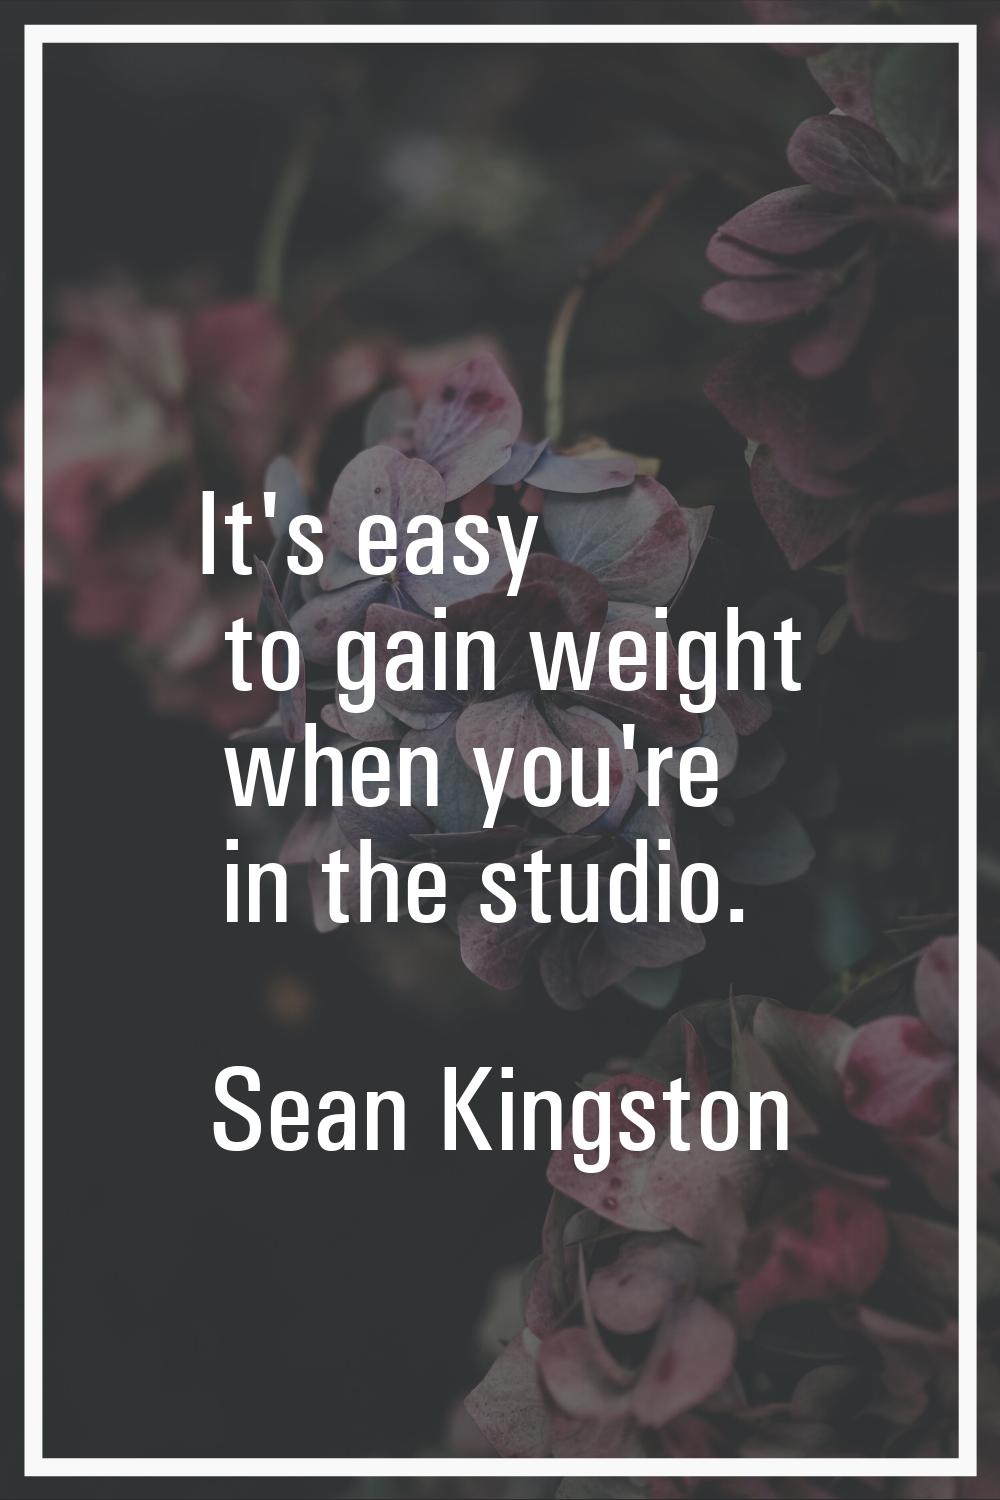 It's easy to gain weight when you're in the studio.